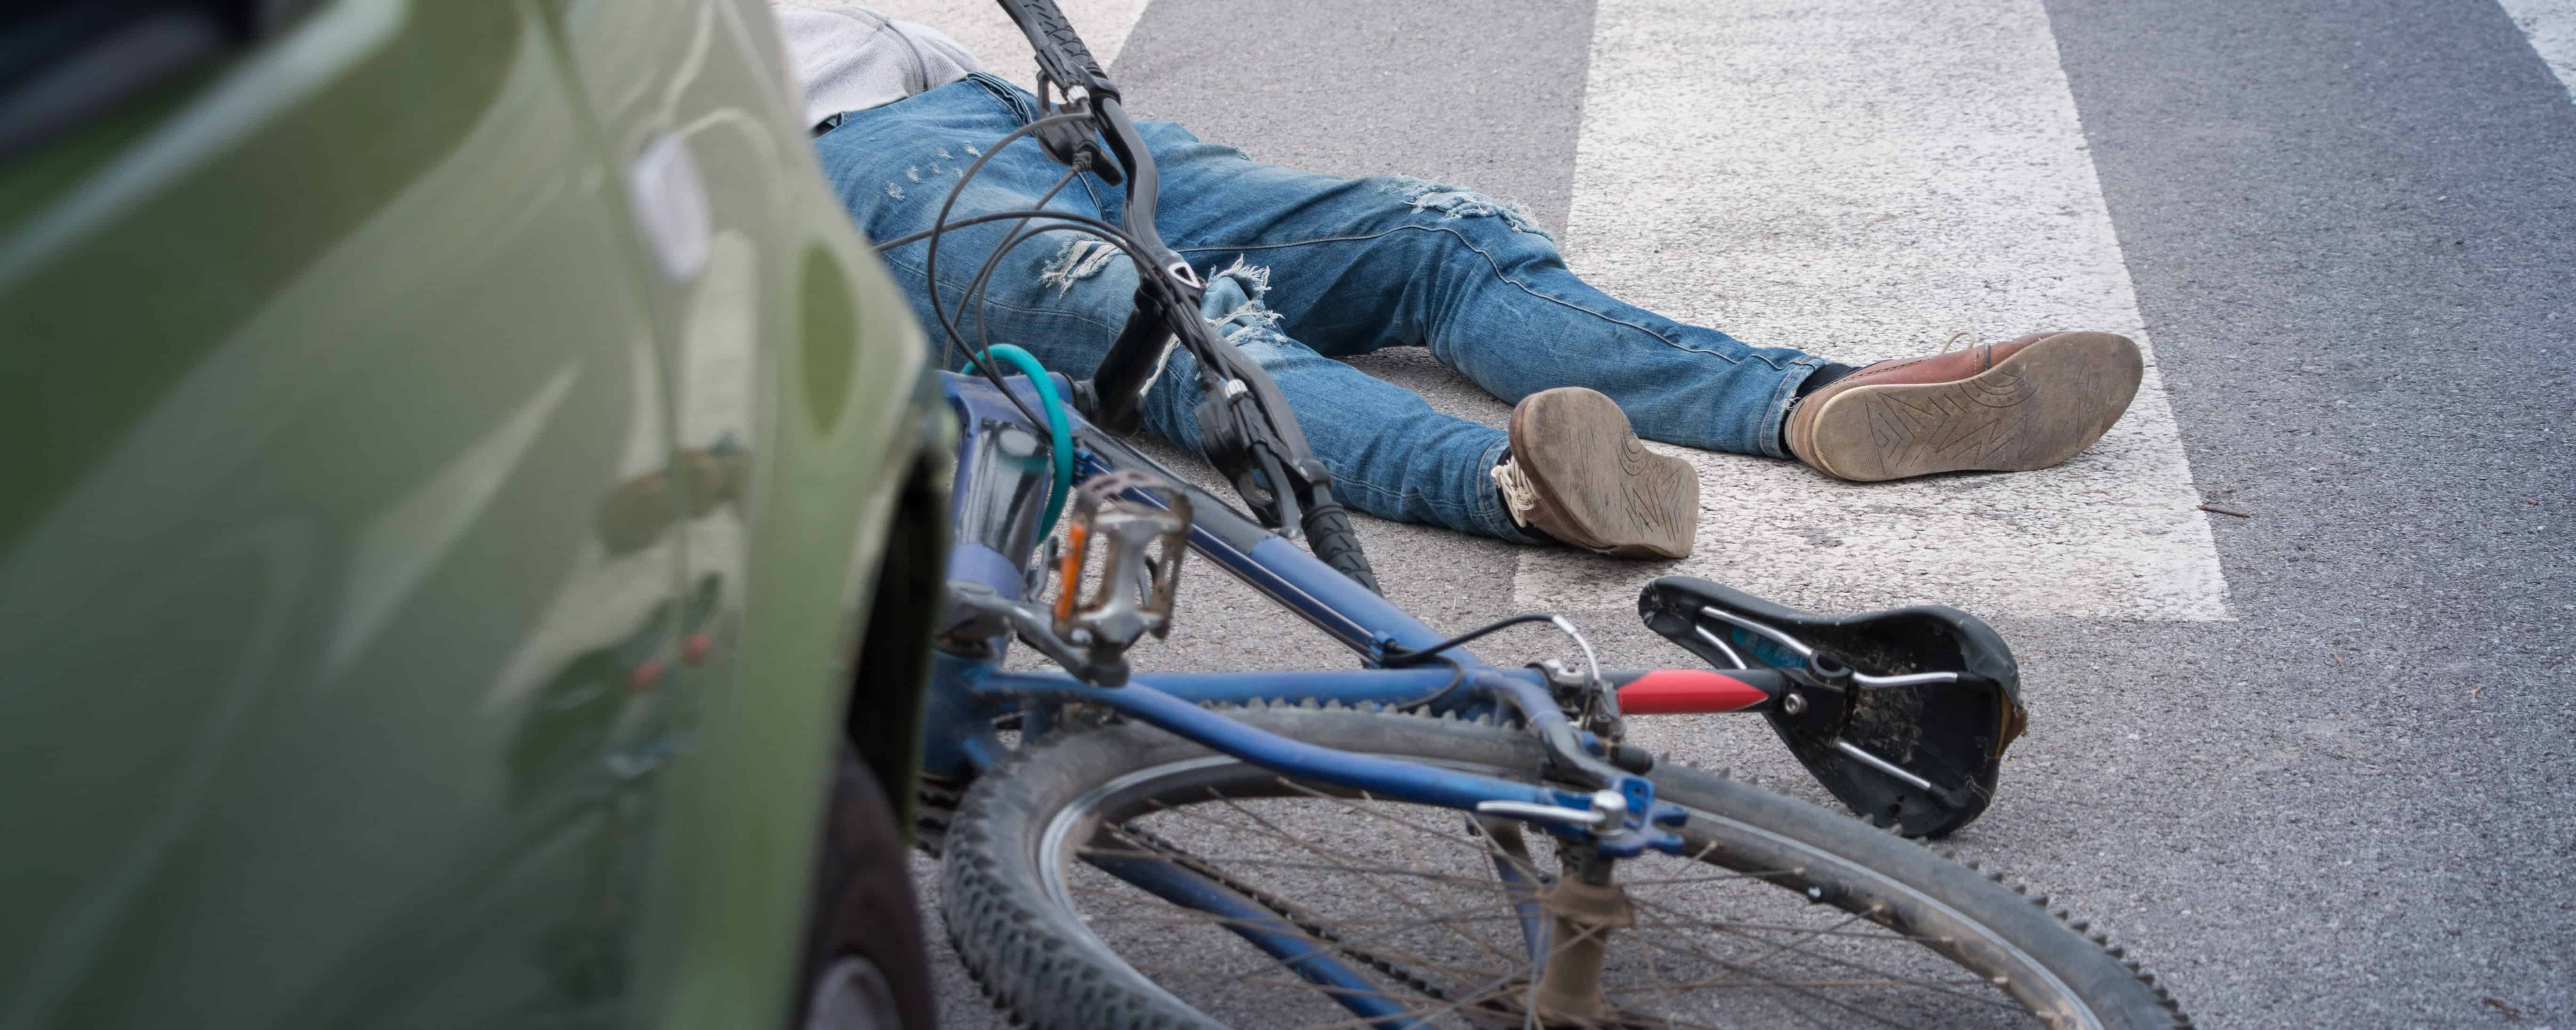 Bicycle accidents can be deadly. Make sure you work with experienced attorneys.